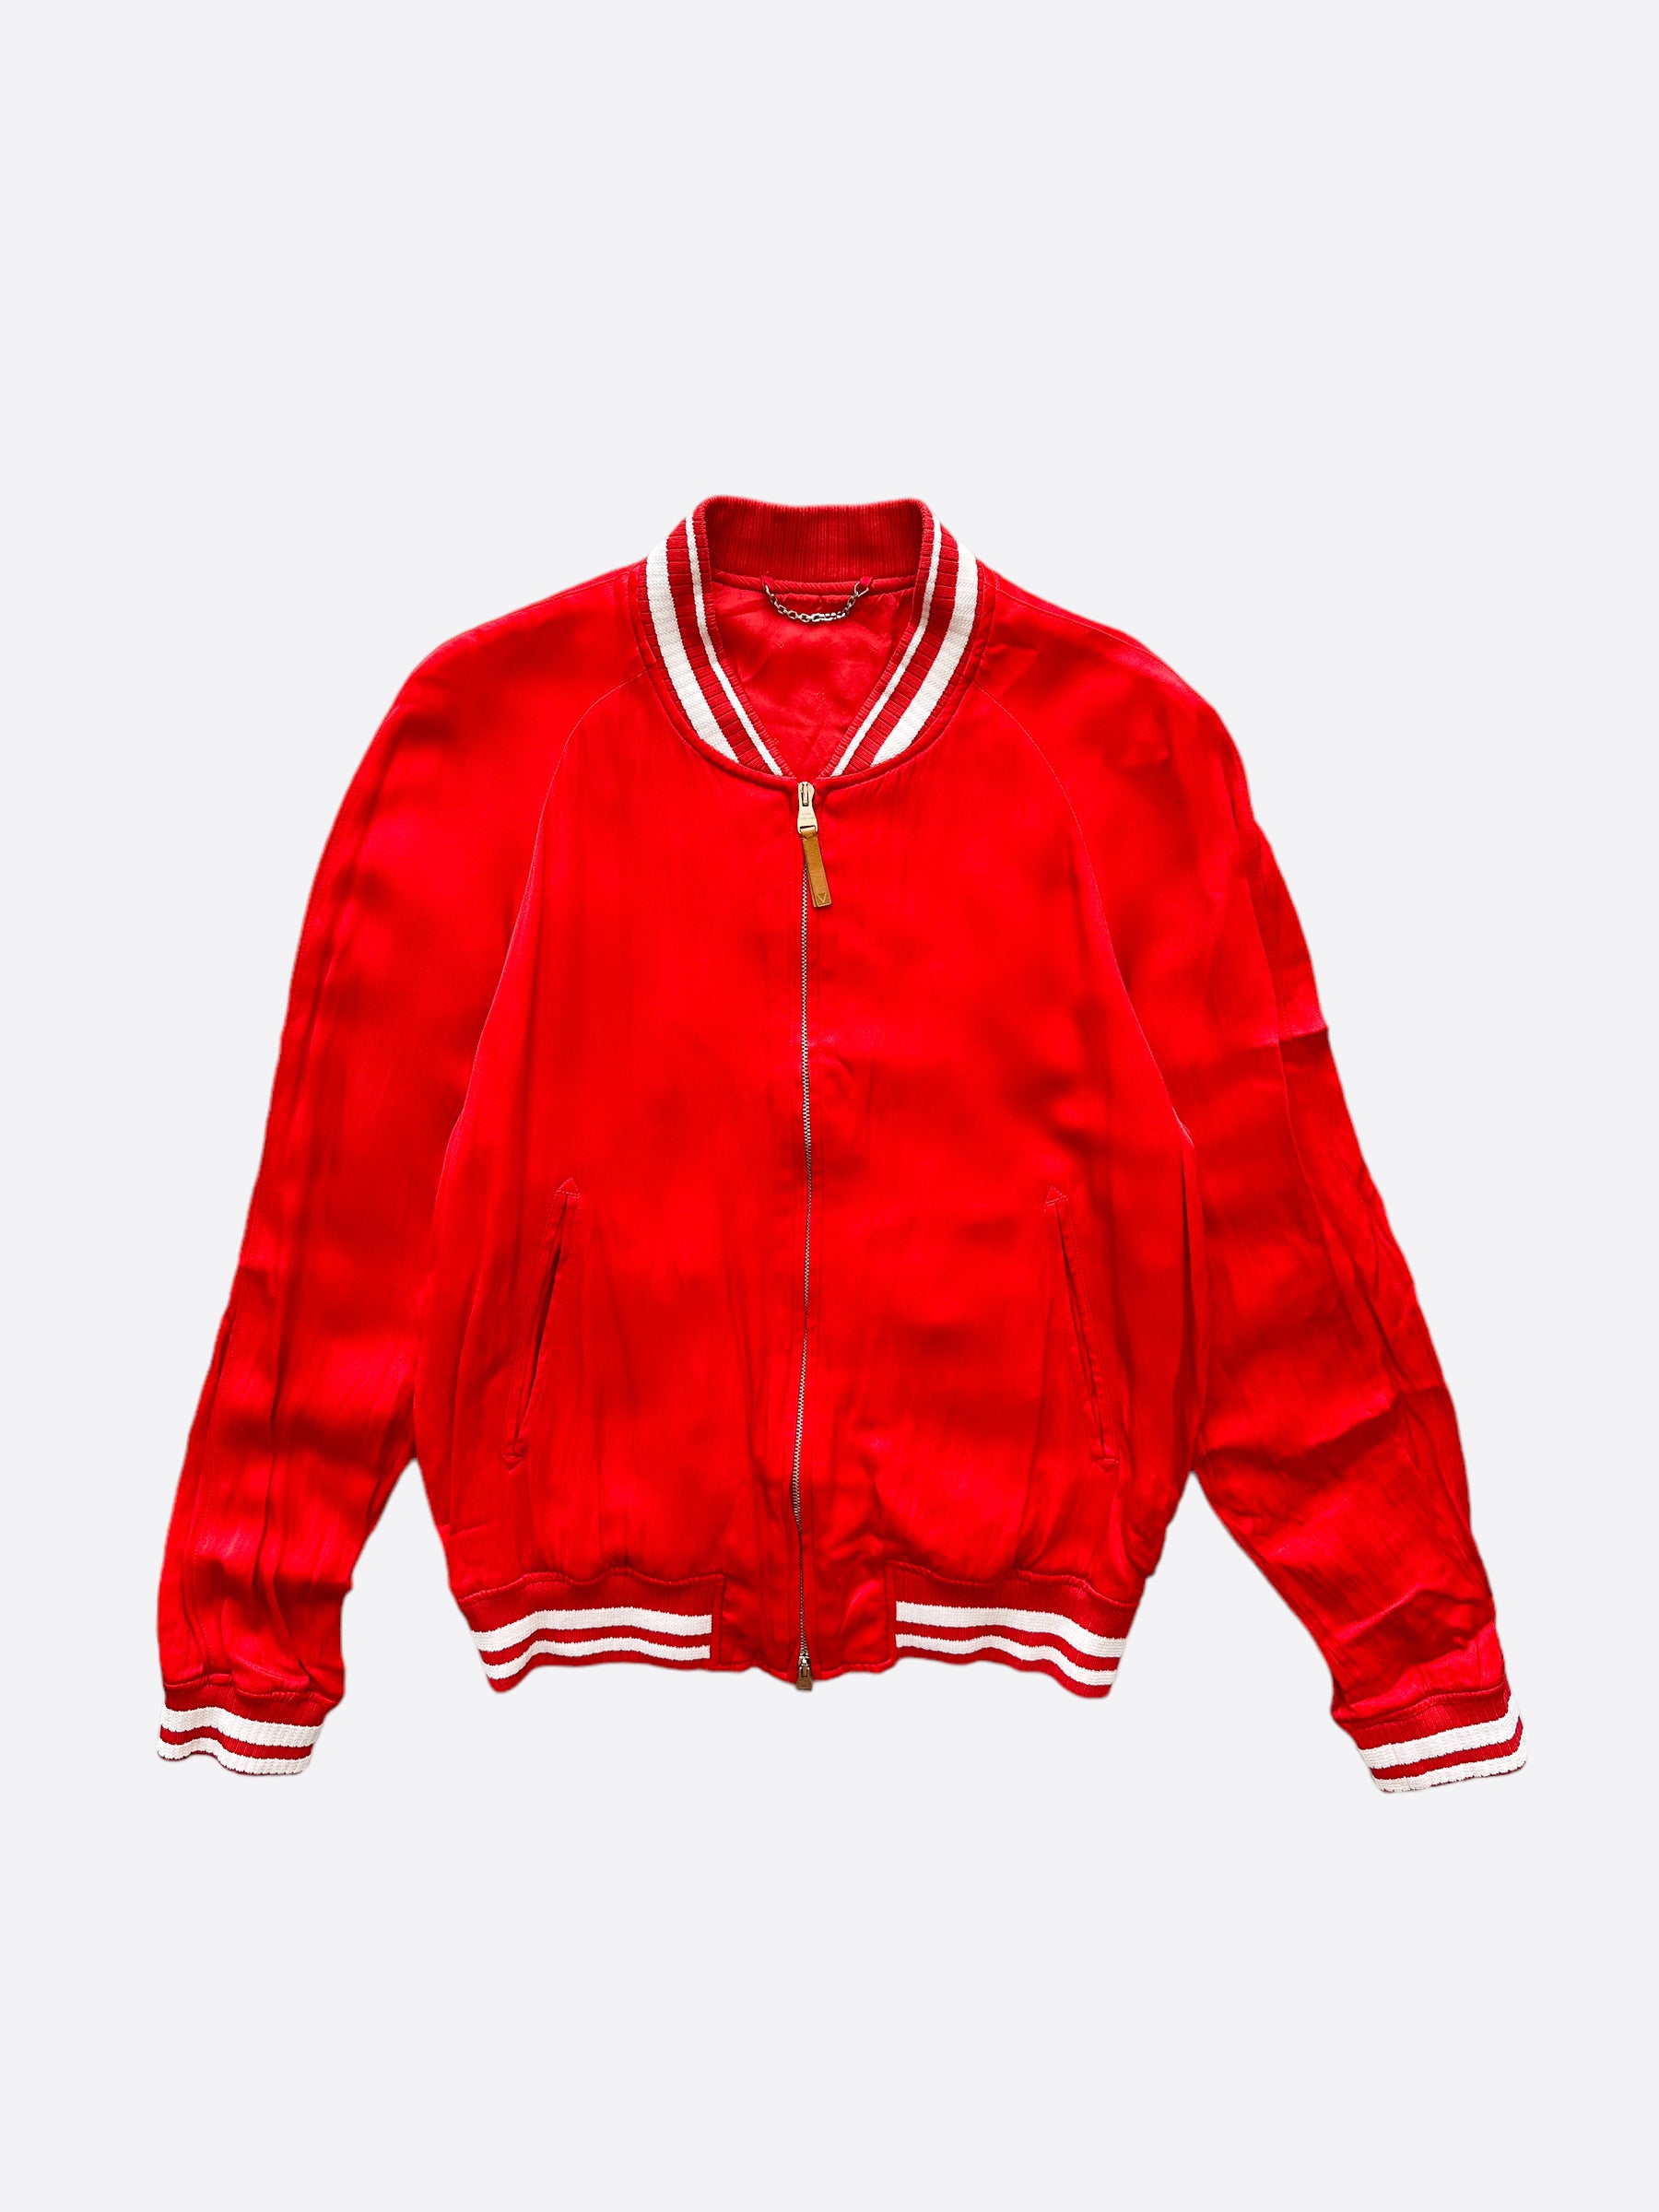 Louis Vuitton Jacket In Red